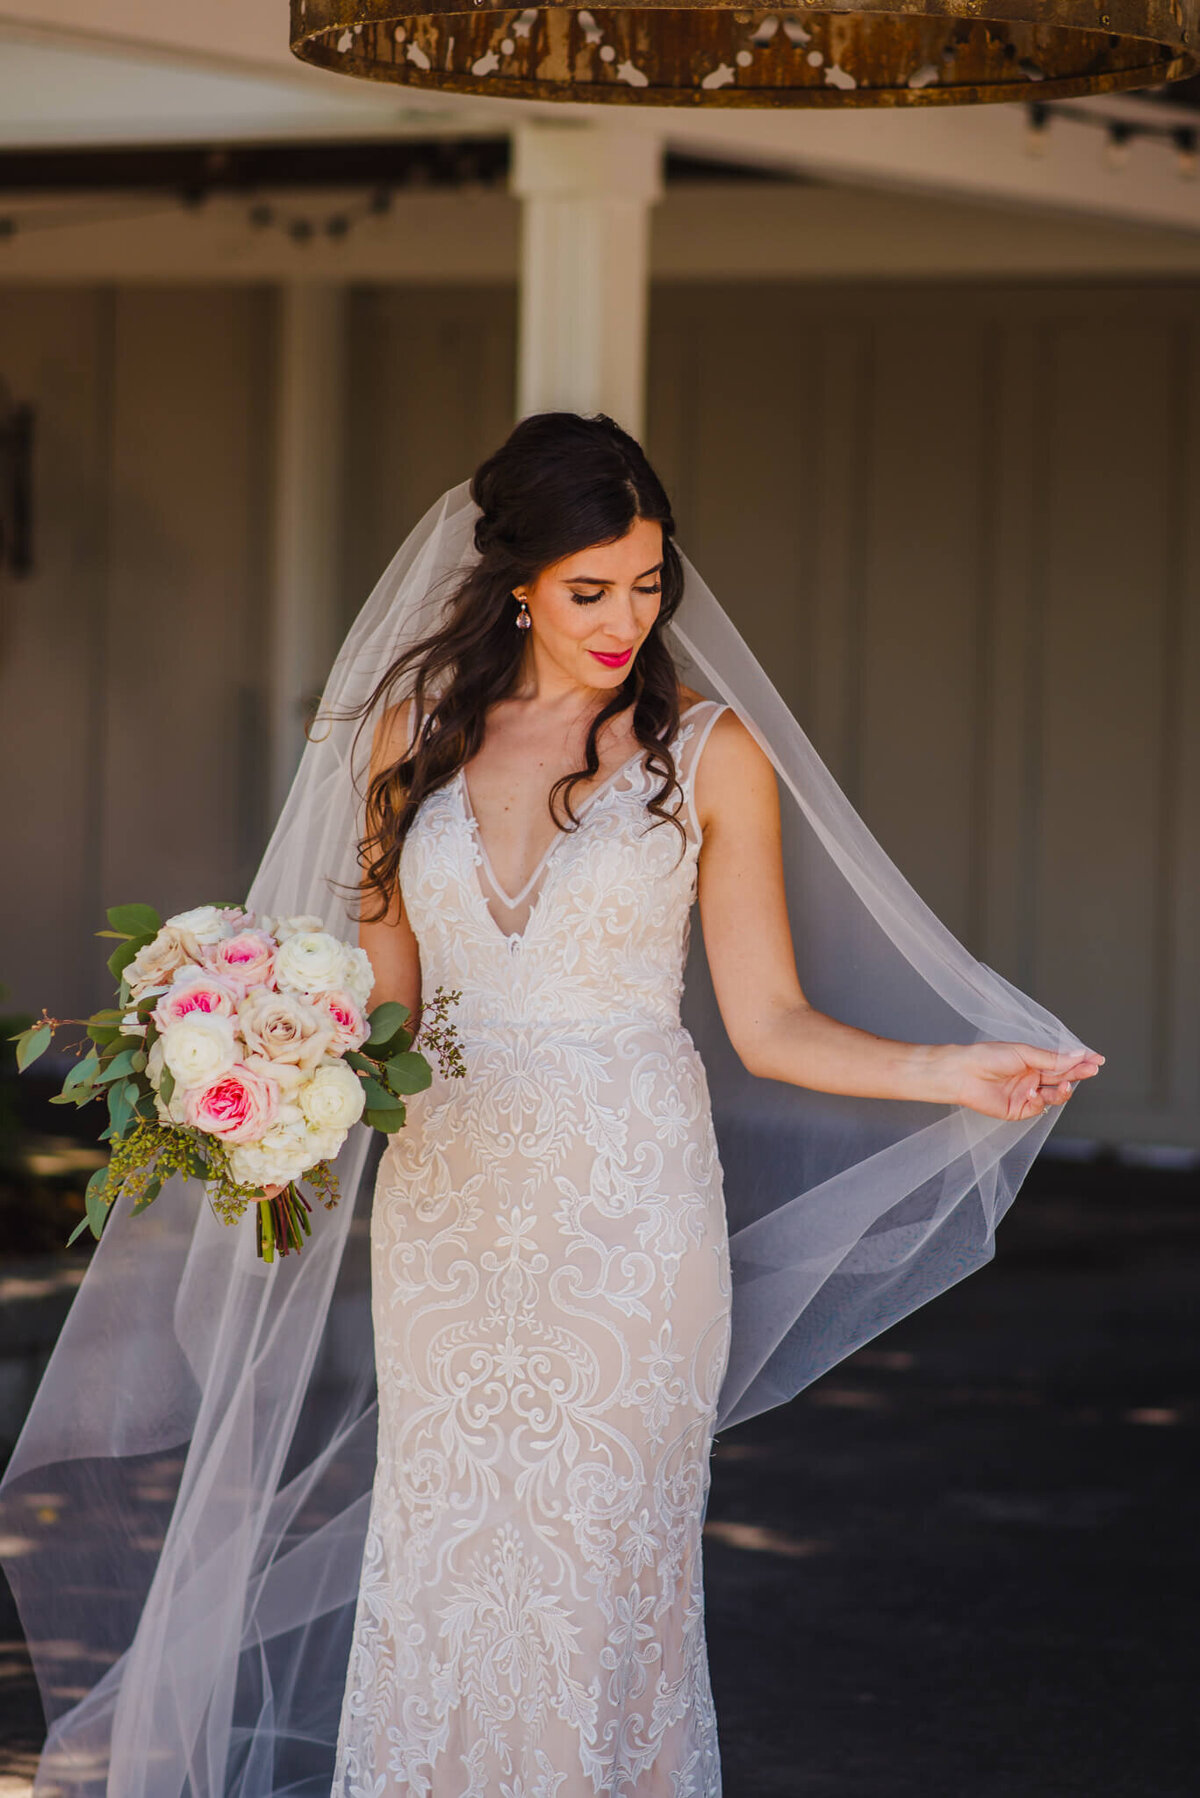 Photo of a bride holding a bouquet and playing with her wedding veil